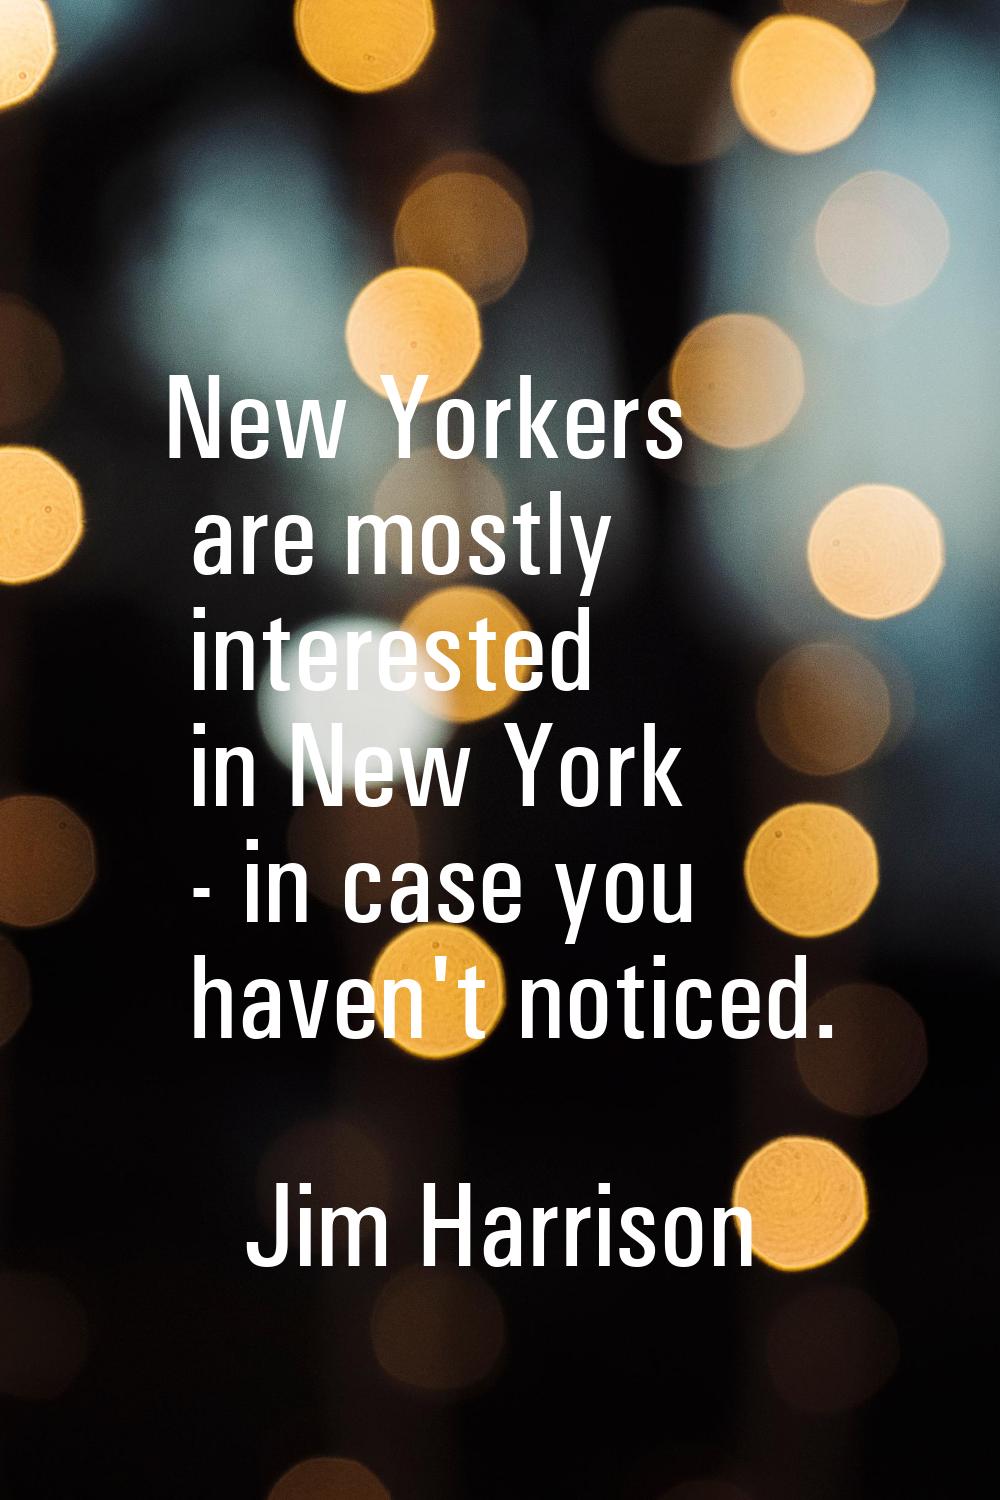 New Yorkers are mostly interested in New York - in case you haven't noticed.